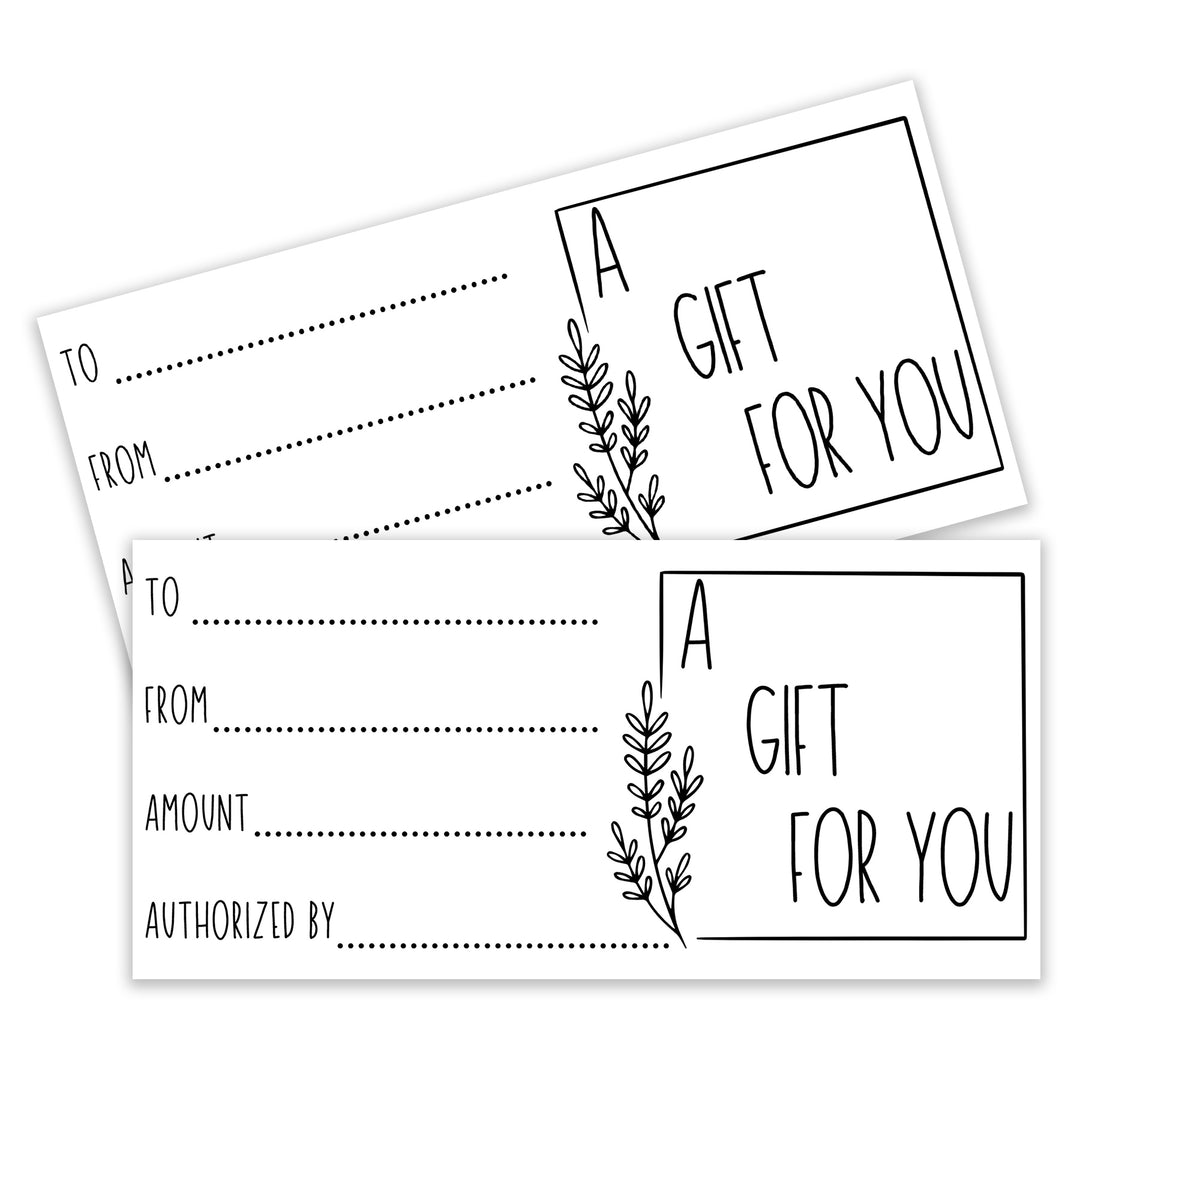 Pre-Printed Gift Certificates on Discount Card Stock - 50 pack